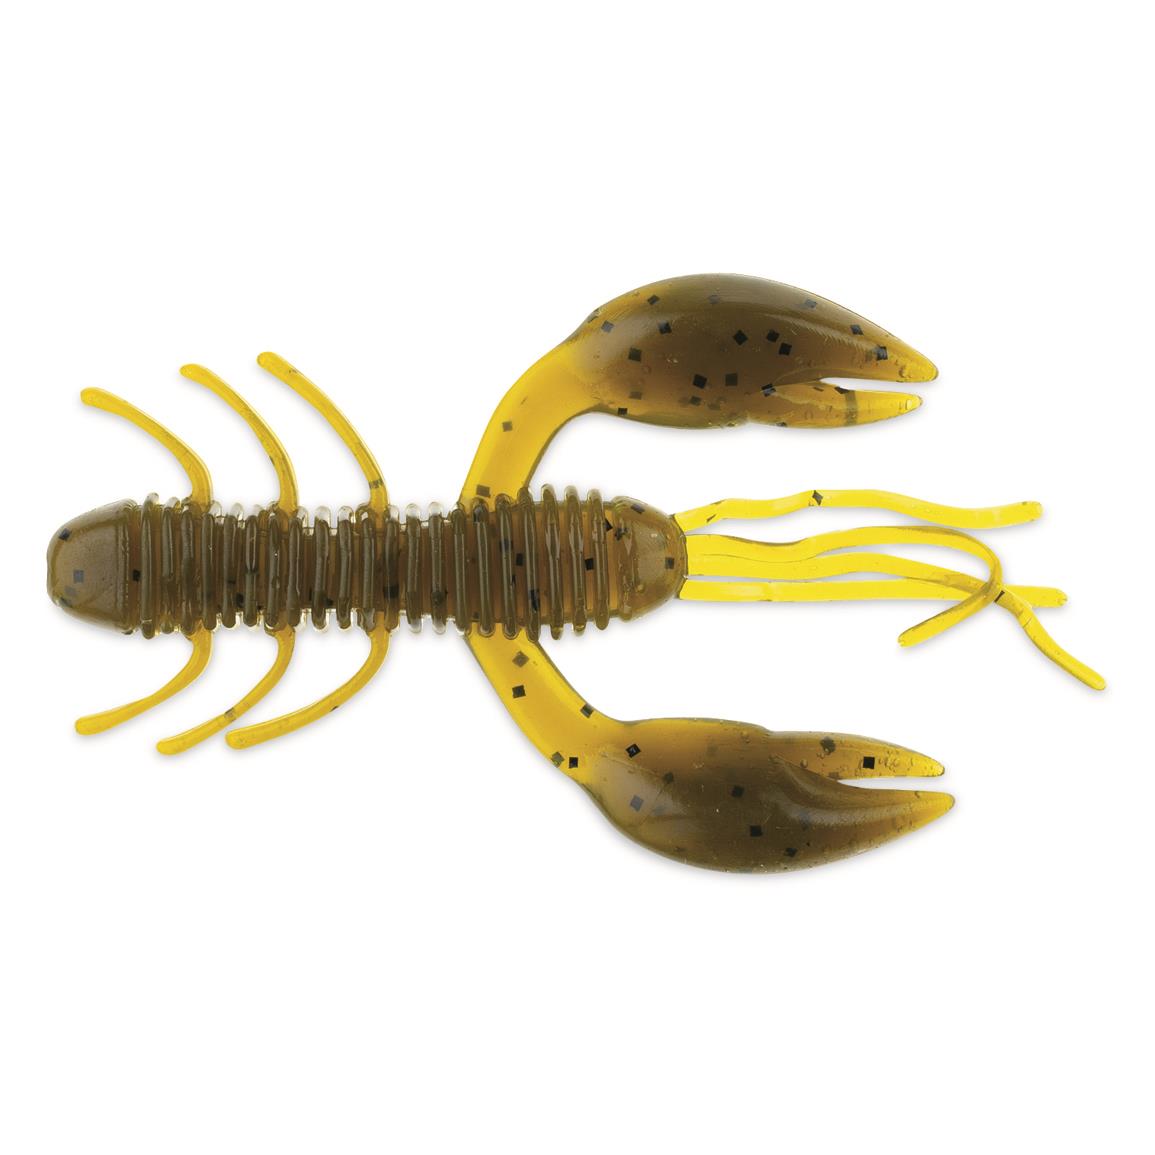 Northland Eye-Candy 6 Nightcrawlers, 5 Pack - 736647, Soft Baits at  Sportsman's Guide